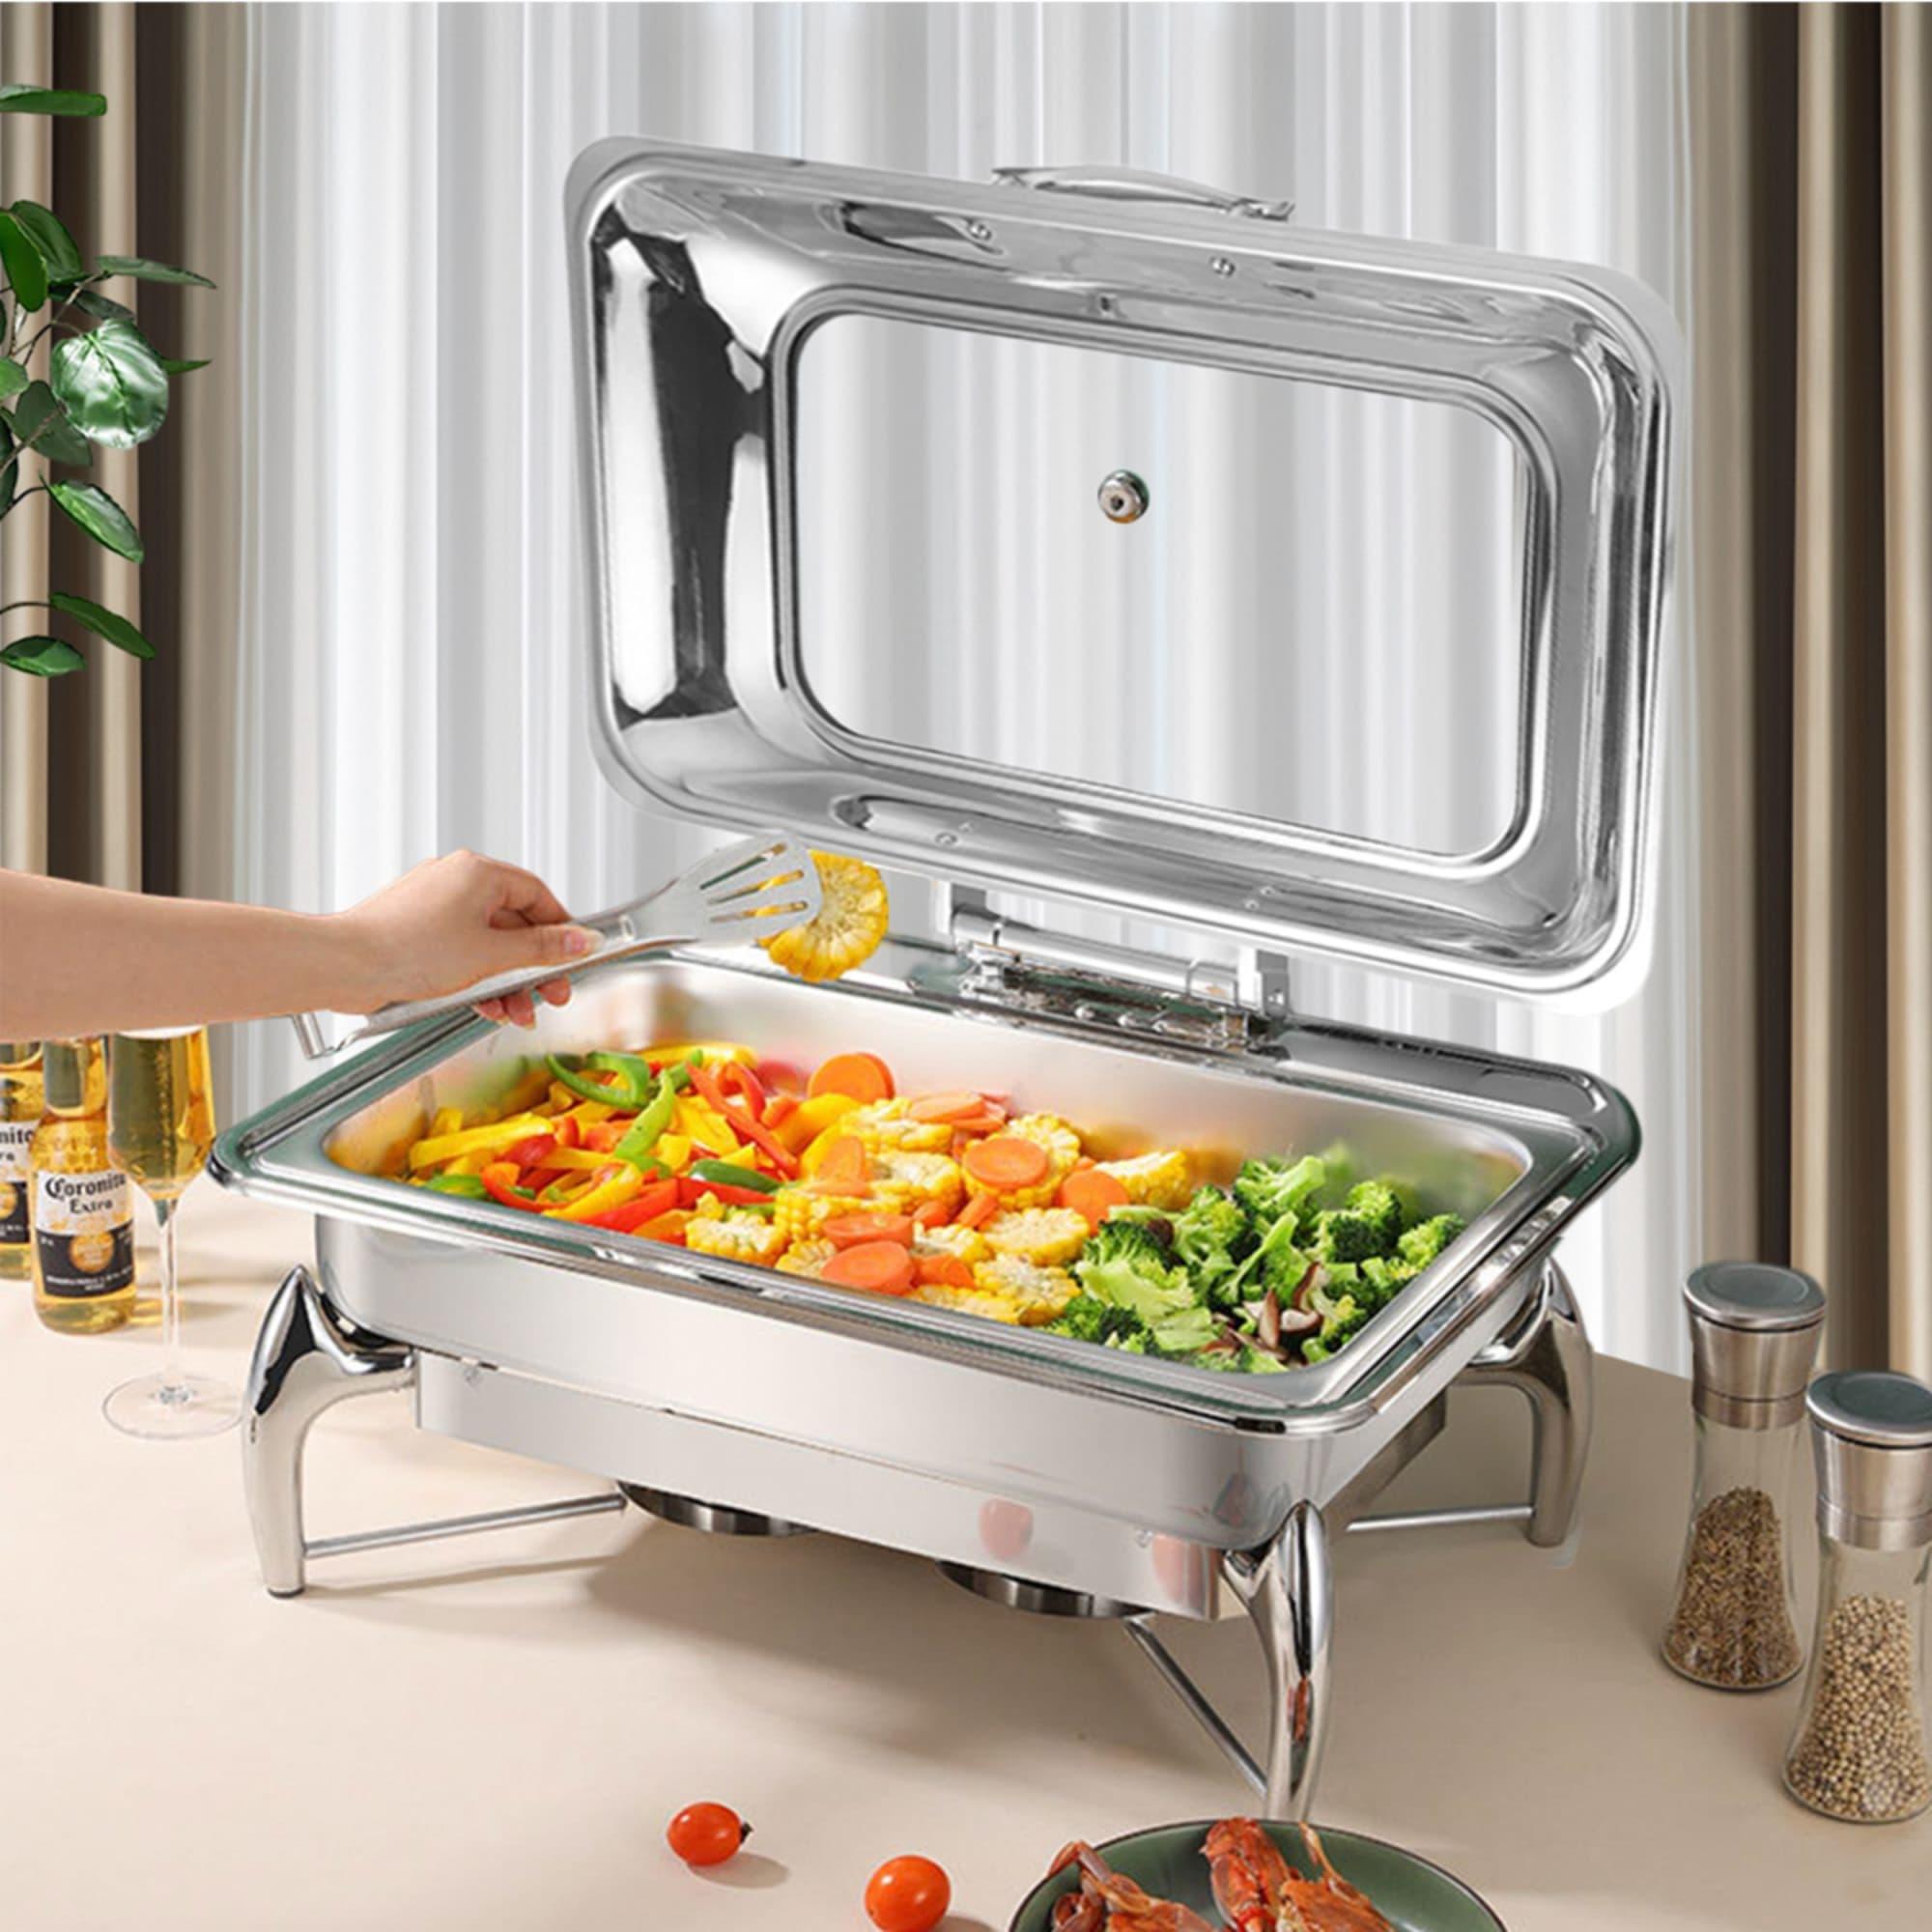 Soga Rectangular Stainless Steel Chafing Dish with Top Lid Set of 2 Image 6